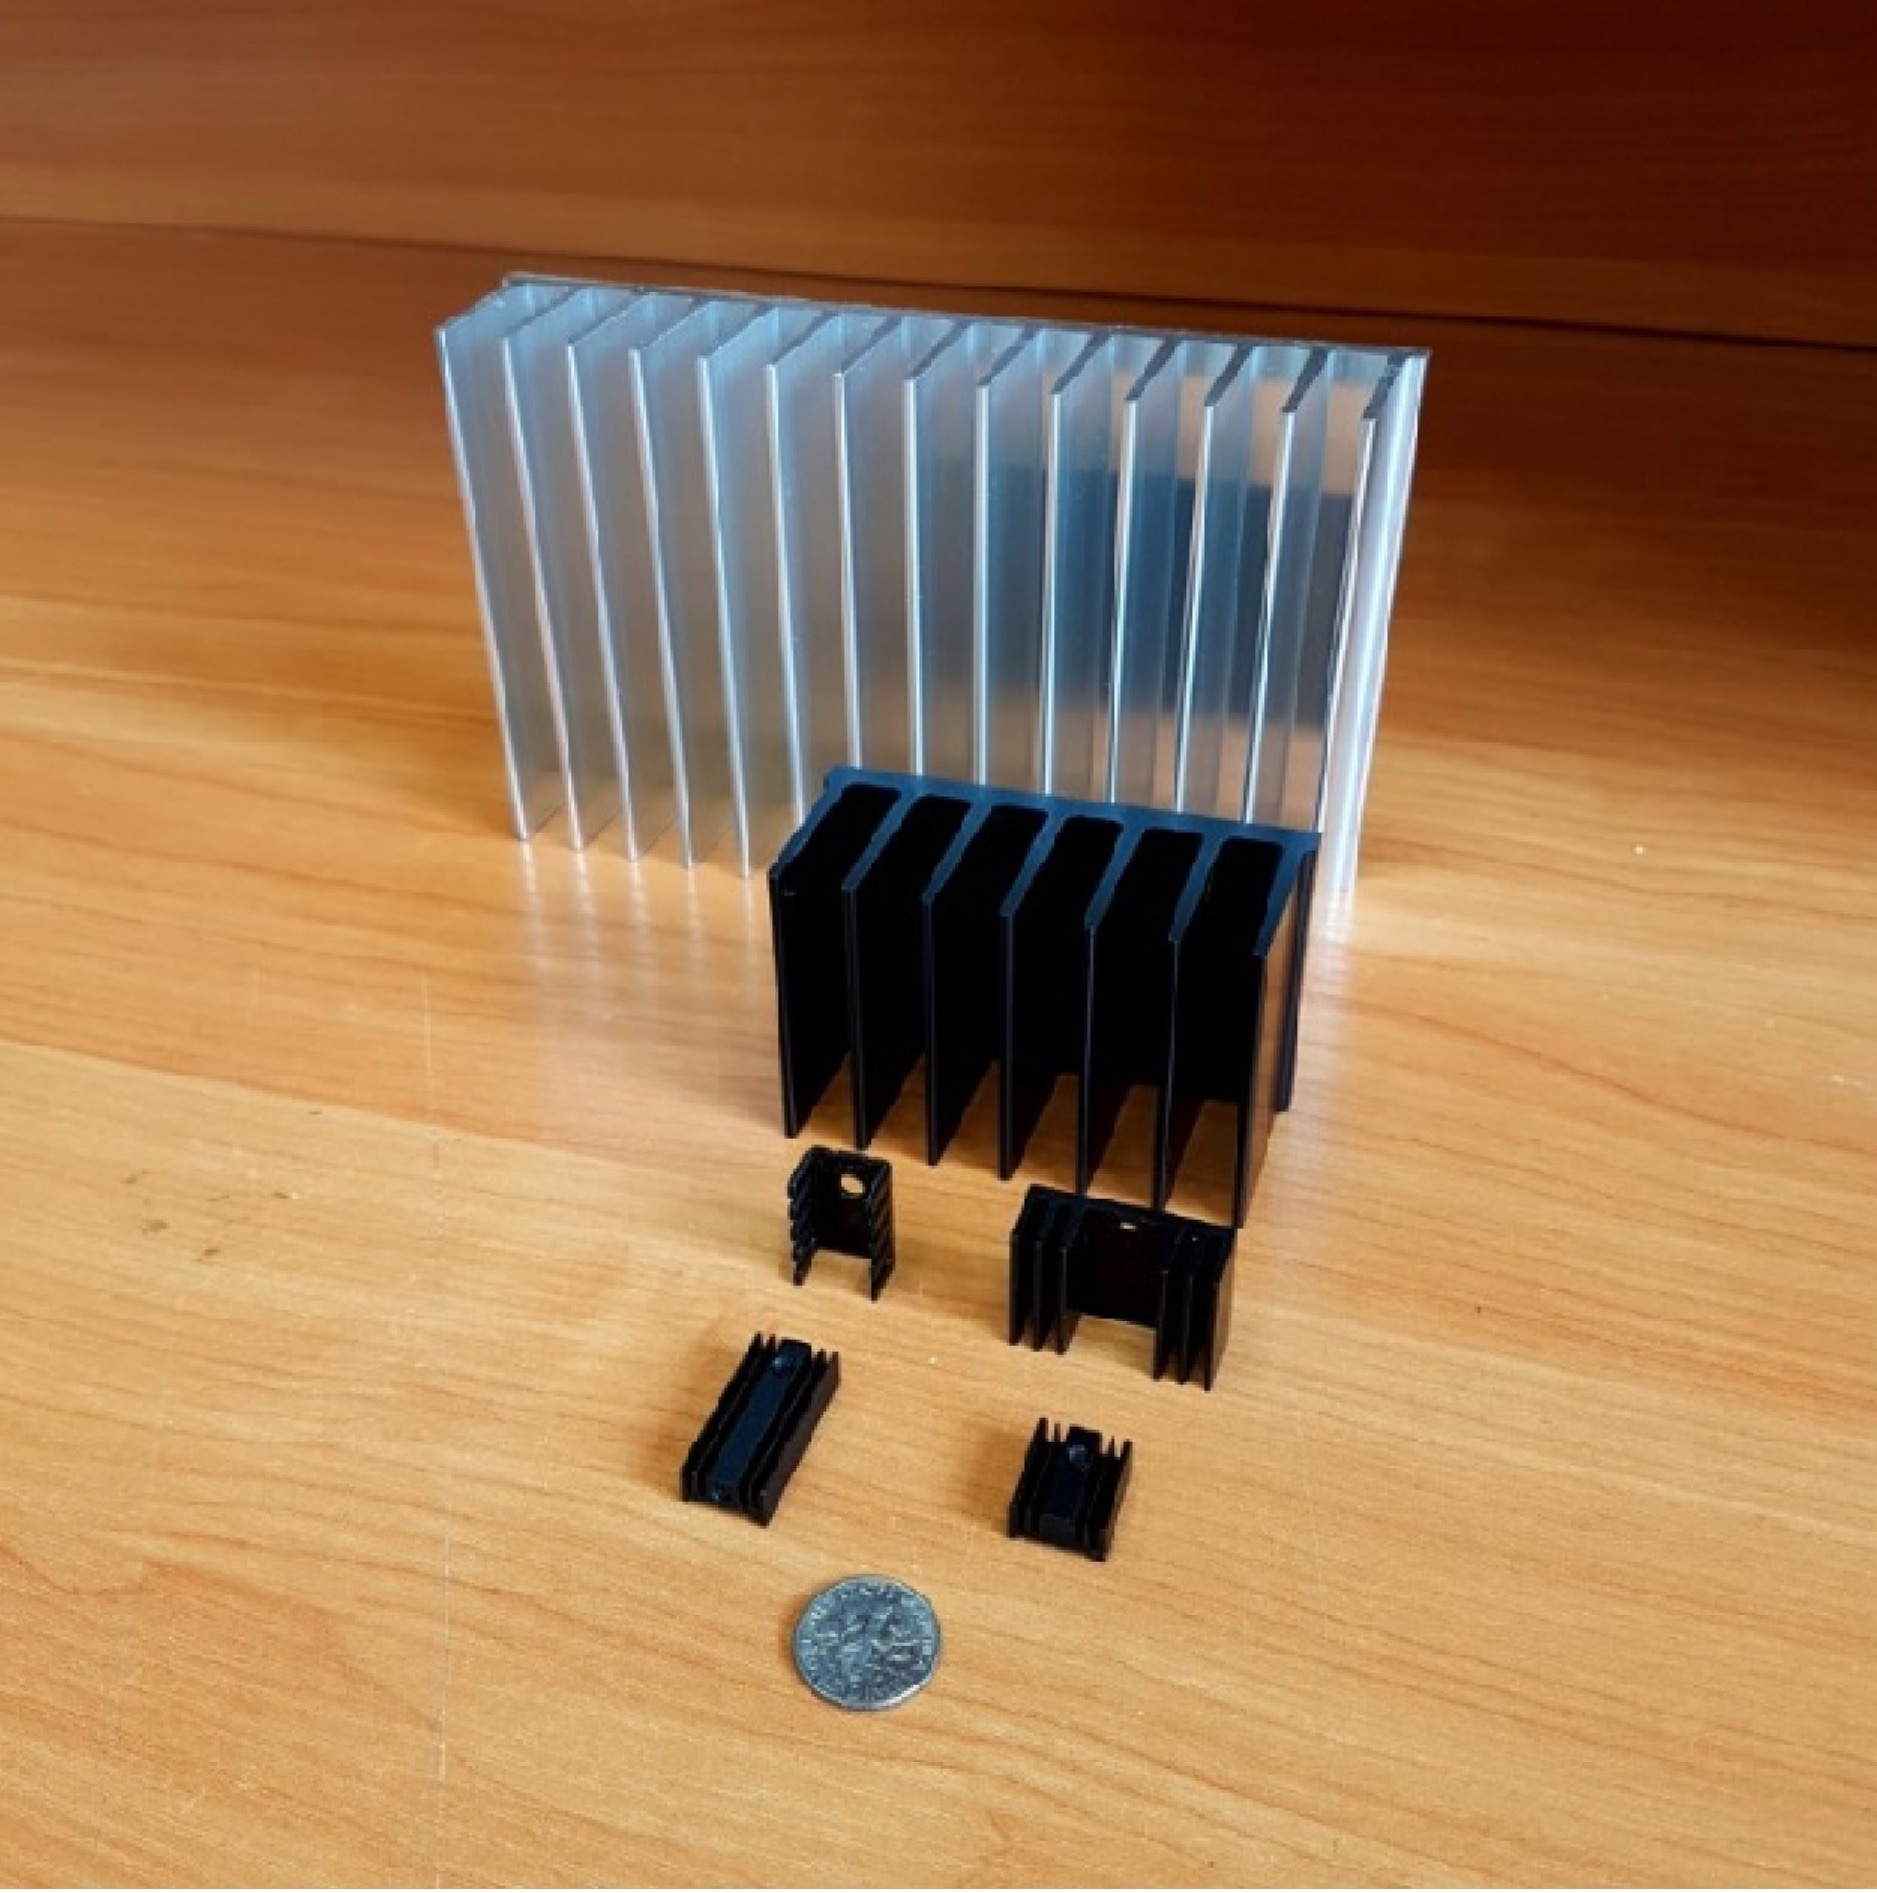 Examples of a passive heat sink.